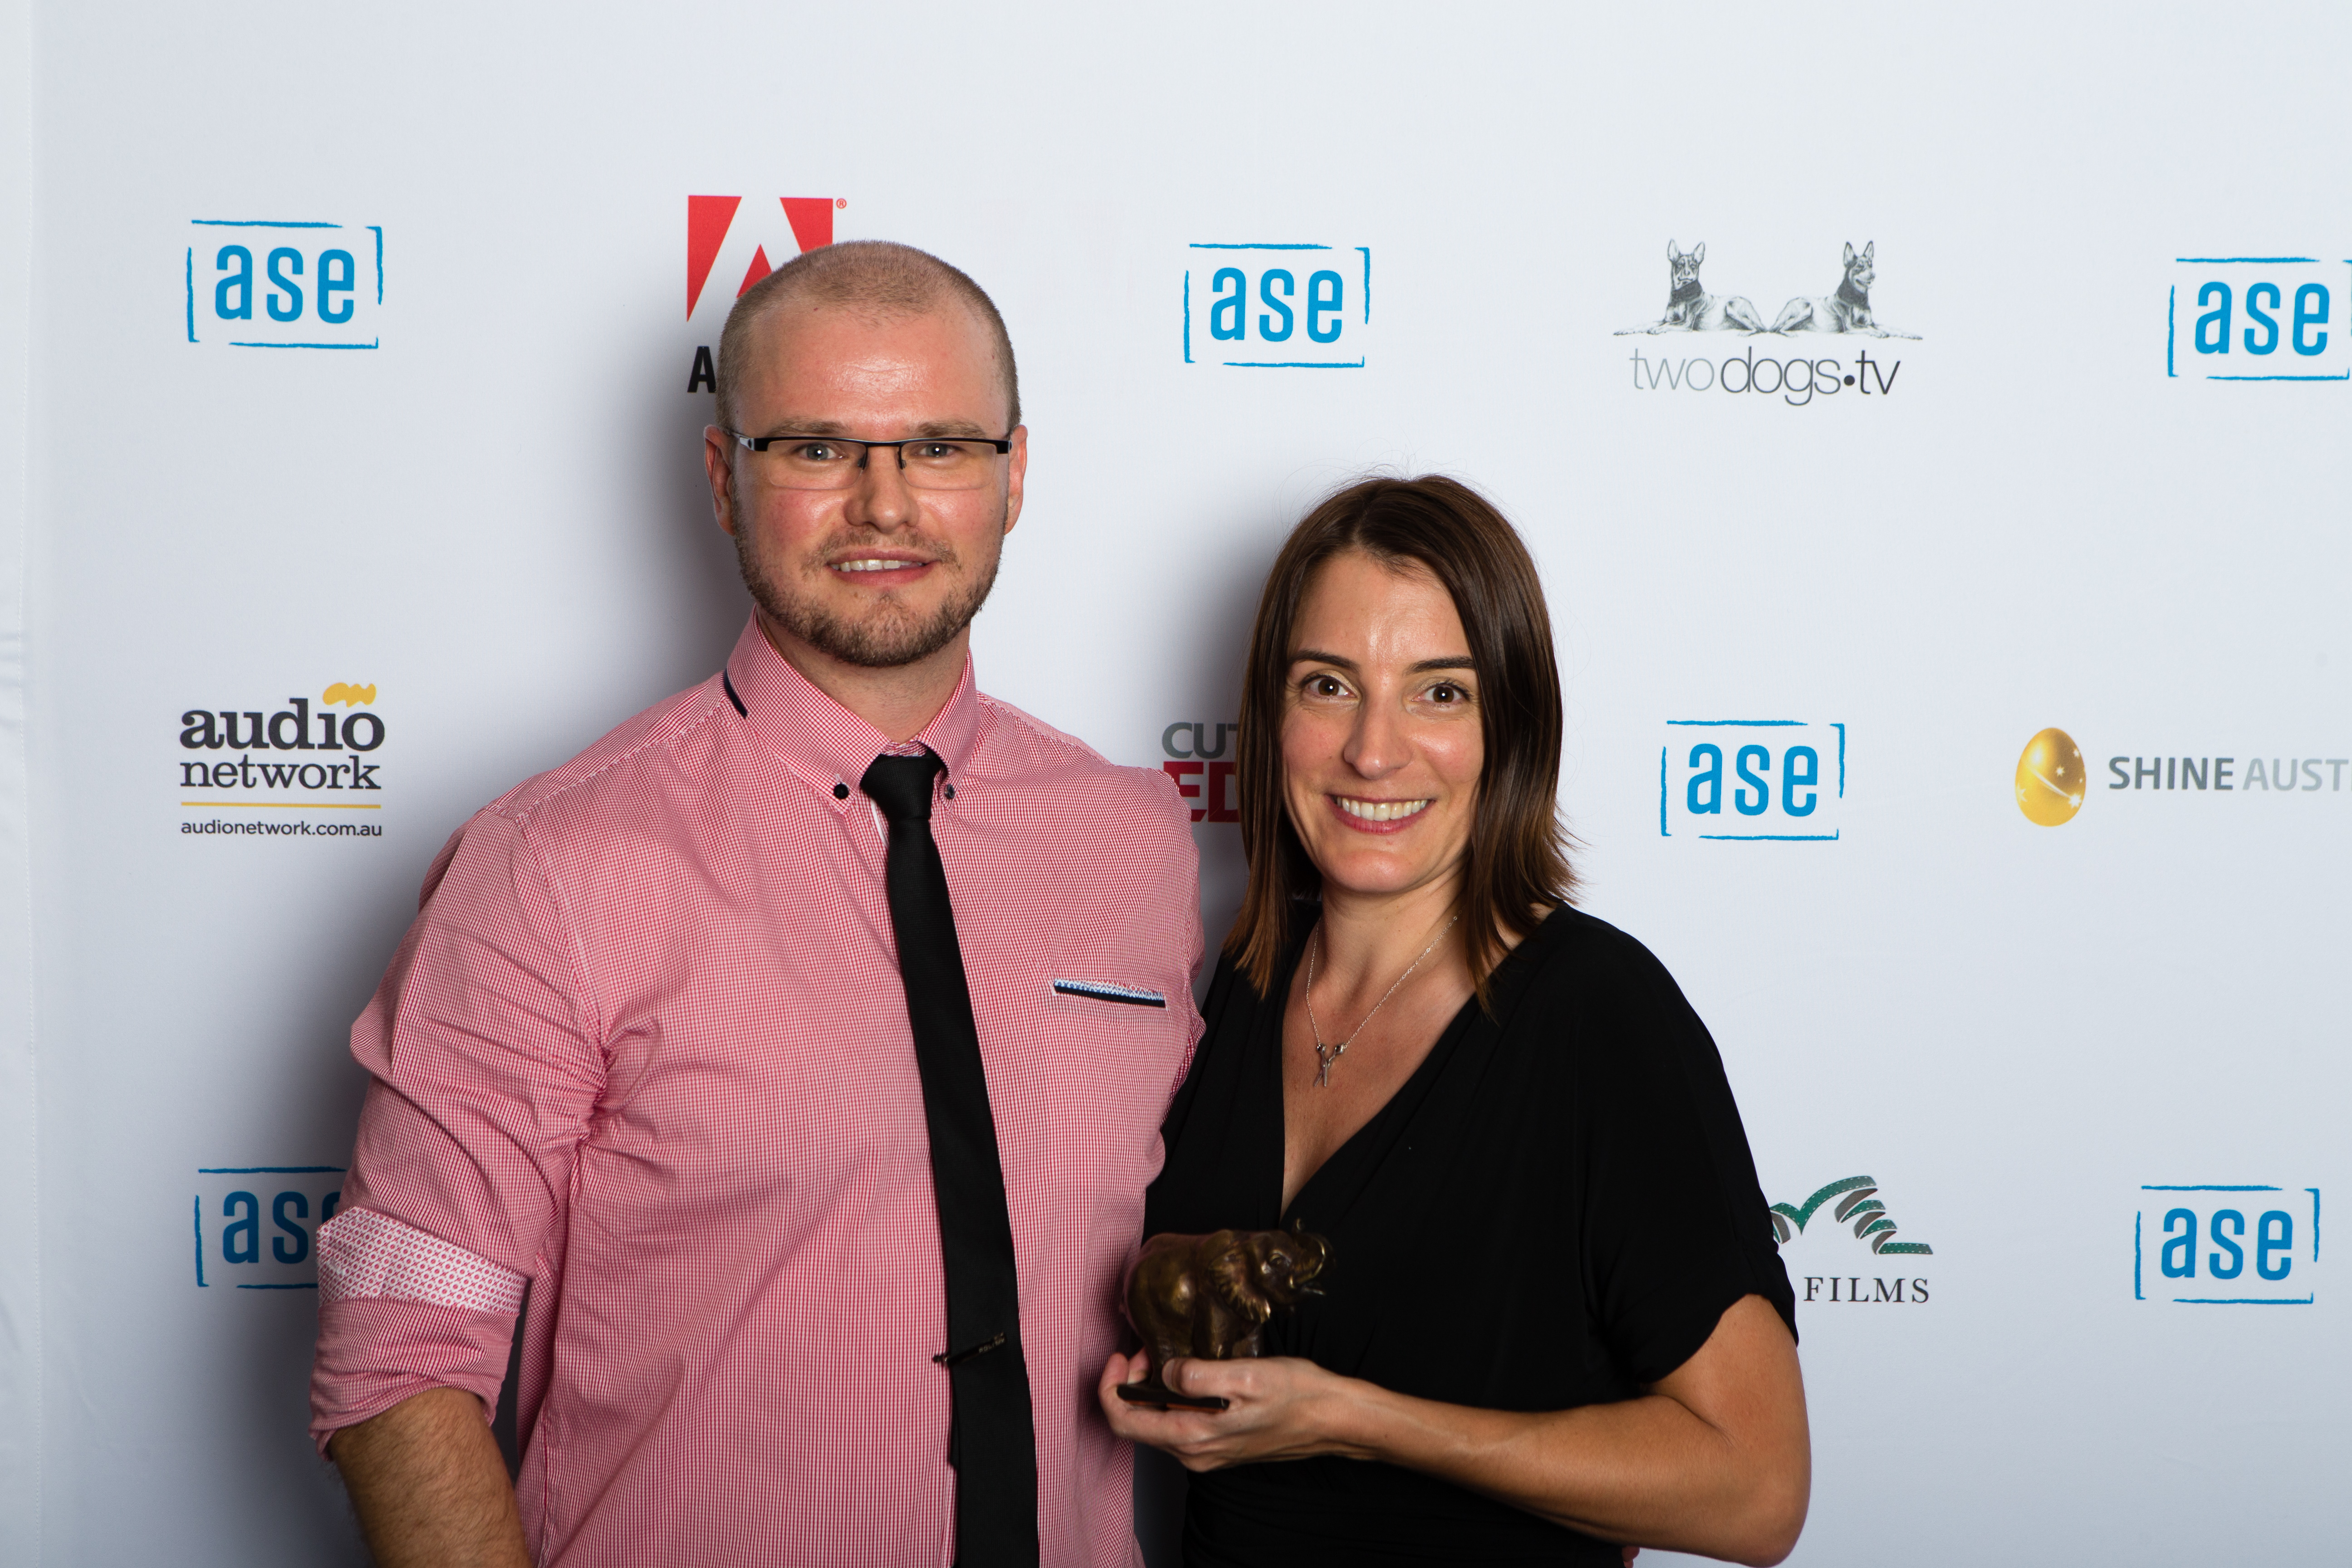 Melanie accepting the award for Best Editing in a Documentary Program at the ASE Ellie Awards 2014. With Adobe's Jon Barrie.